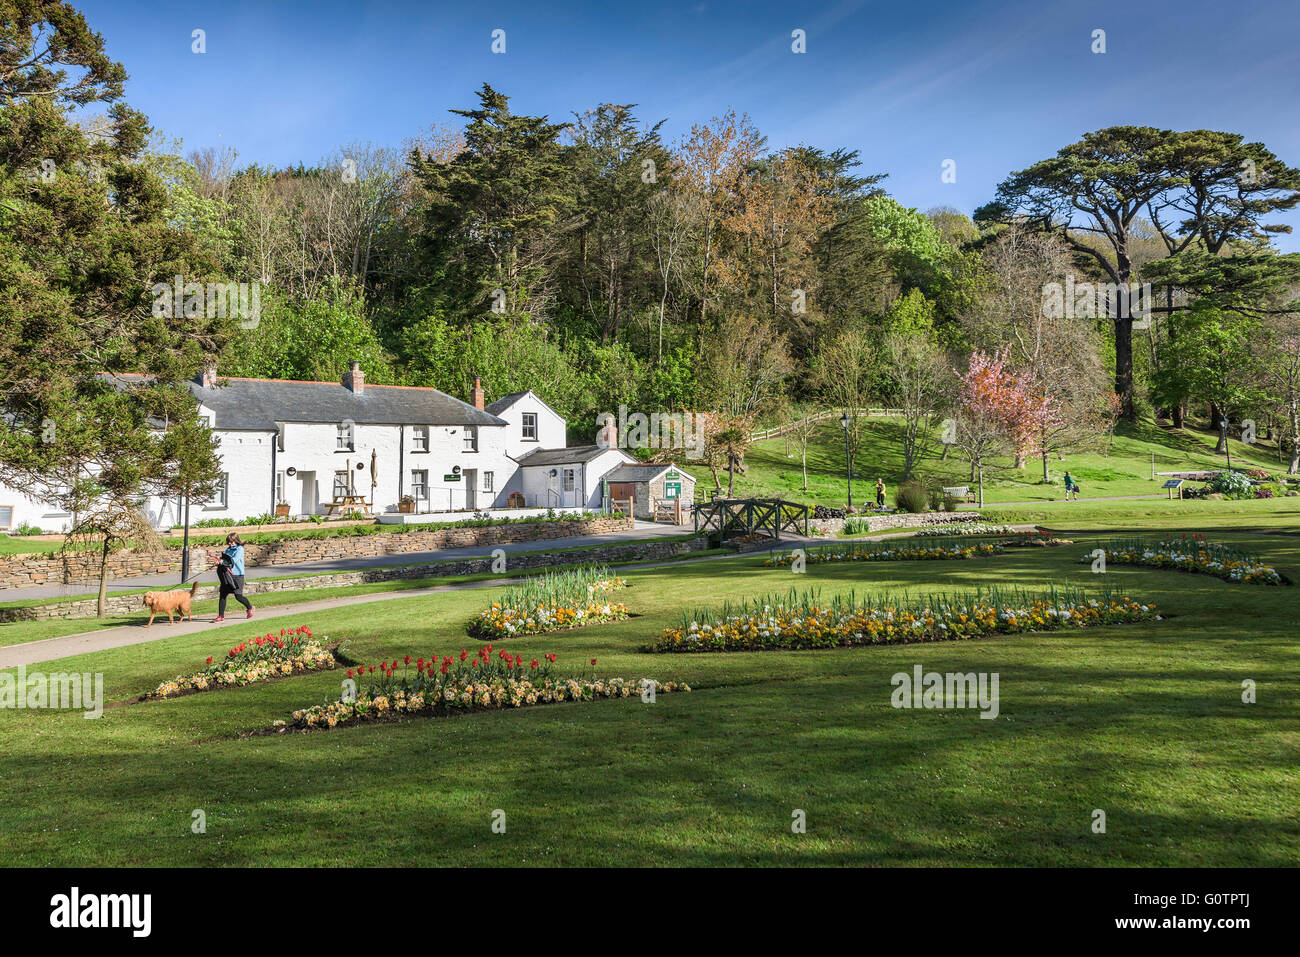 The Heritage Cottages in Trenance Gardens in Newquay, Cornwall. Stock Photo